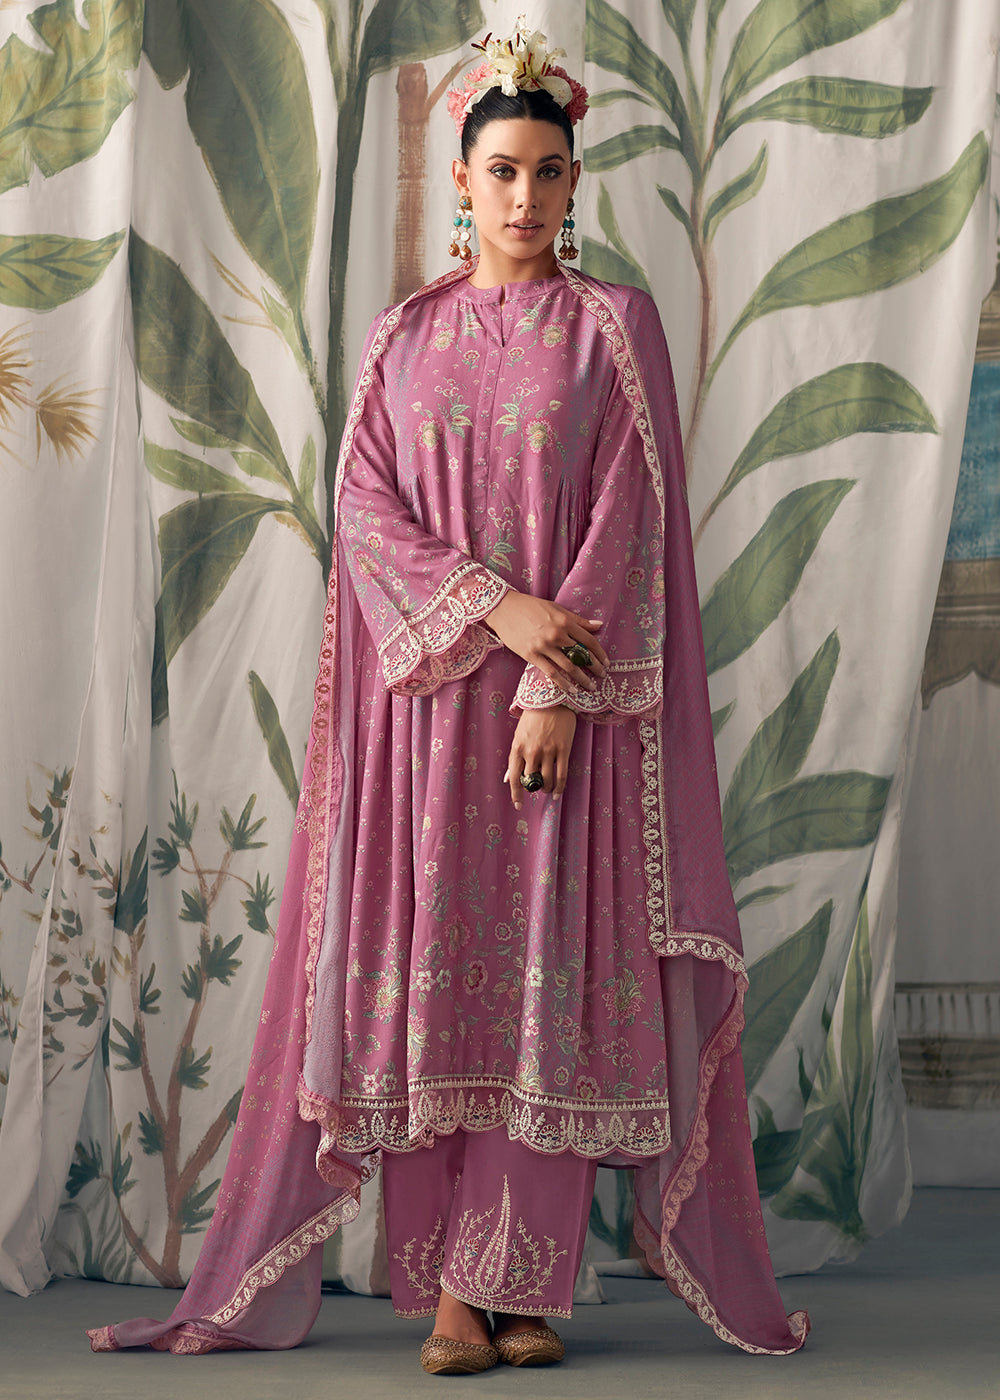 Buy Now Pink Pure Maslin Cotton Digital Printed Salwar Suit Online in USA, UK, Canada, Germany, Australia & Worldwide at Empress Clothing. 